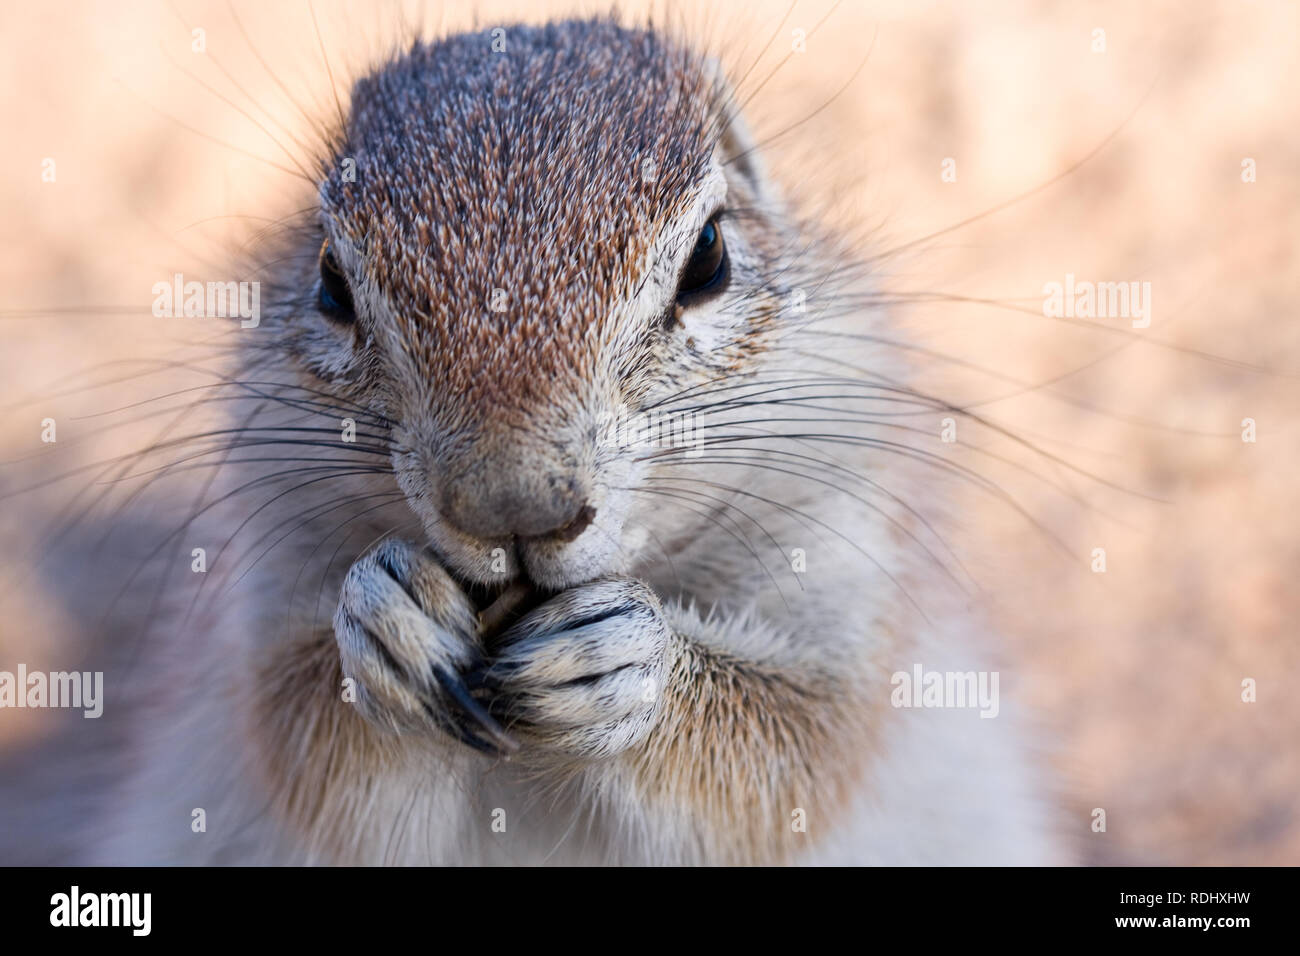 Cape ground squirrels don't hoard food and must forage daily like this squirrel in the Kgalagadi Transfrontier Park, in Botswana and South Africa Stock Photo